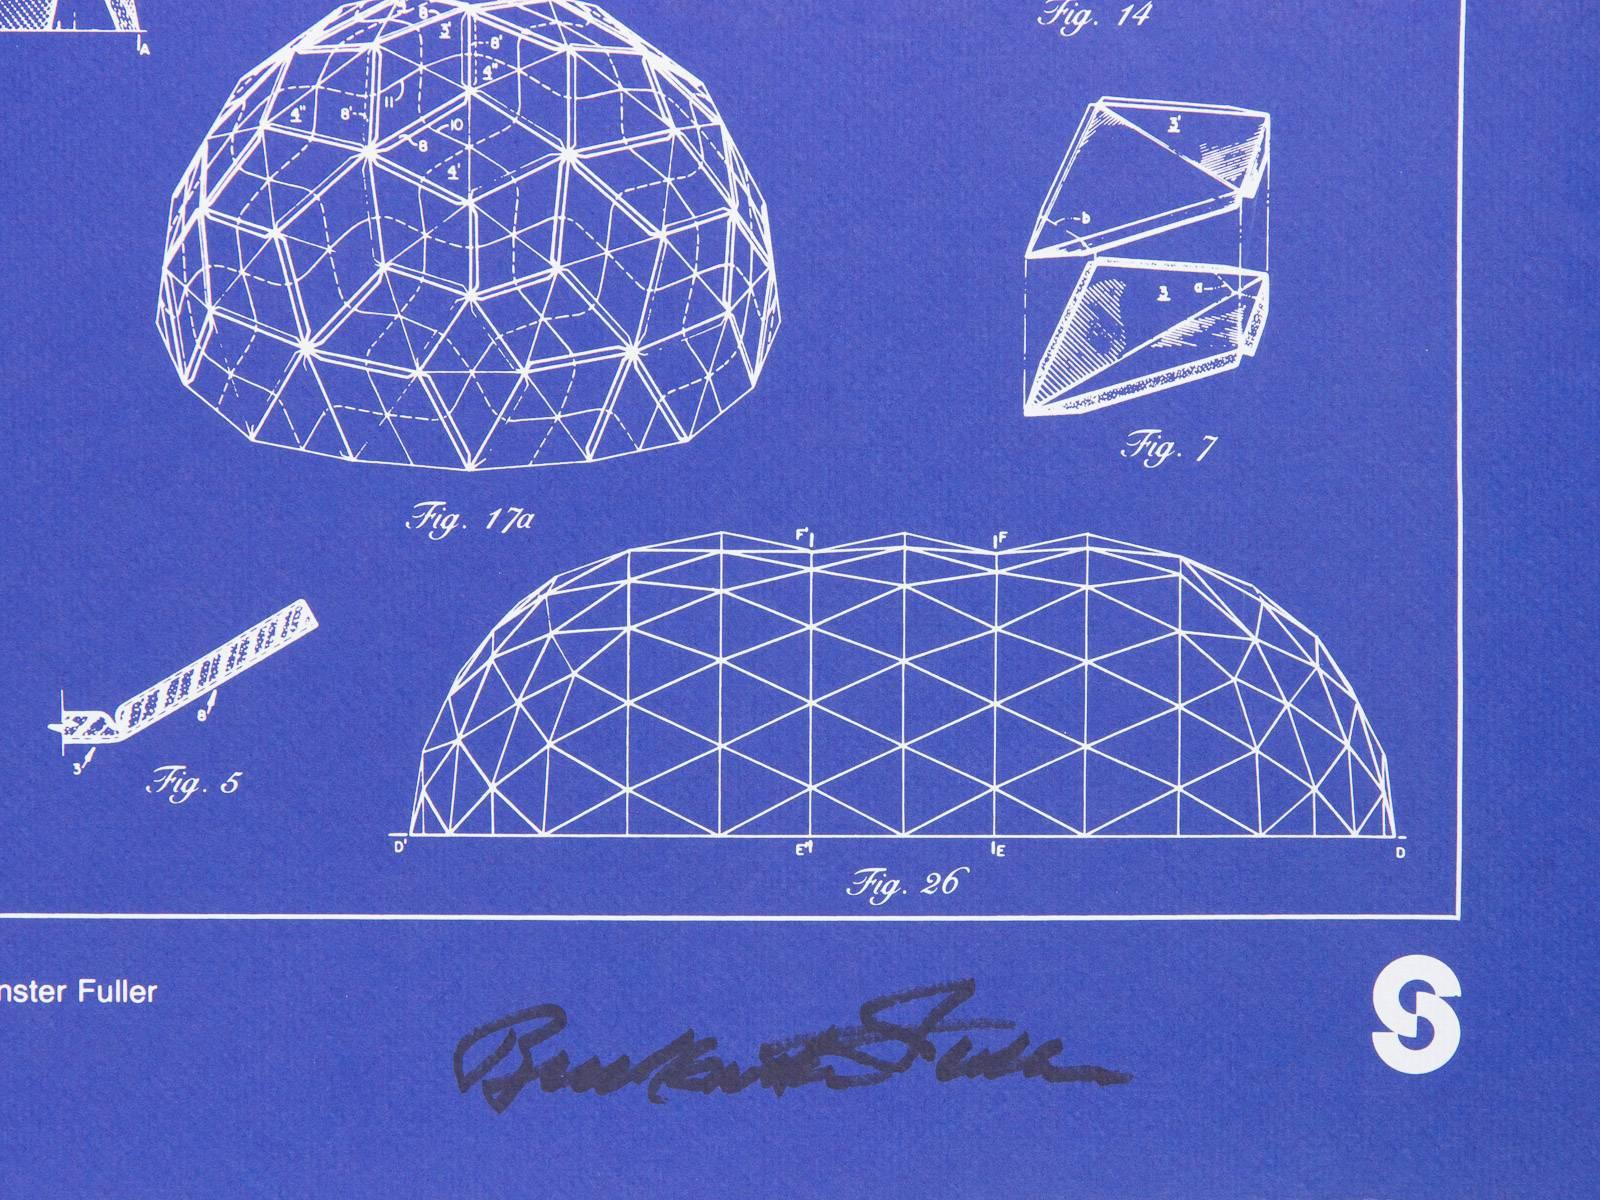 Schematic of Buckminster Fuller's Laminar Geodesic Dome (1960), signed by Fuller, for the Carl Solway Gallery in 1981. Rich blue hue creates a blueprint effect. Poster will ship in a gallery frame.

22